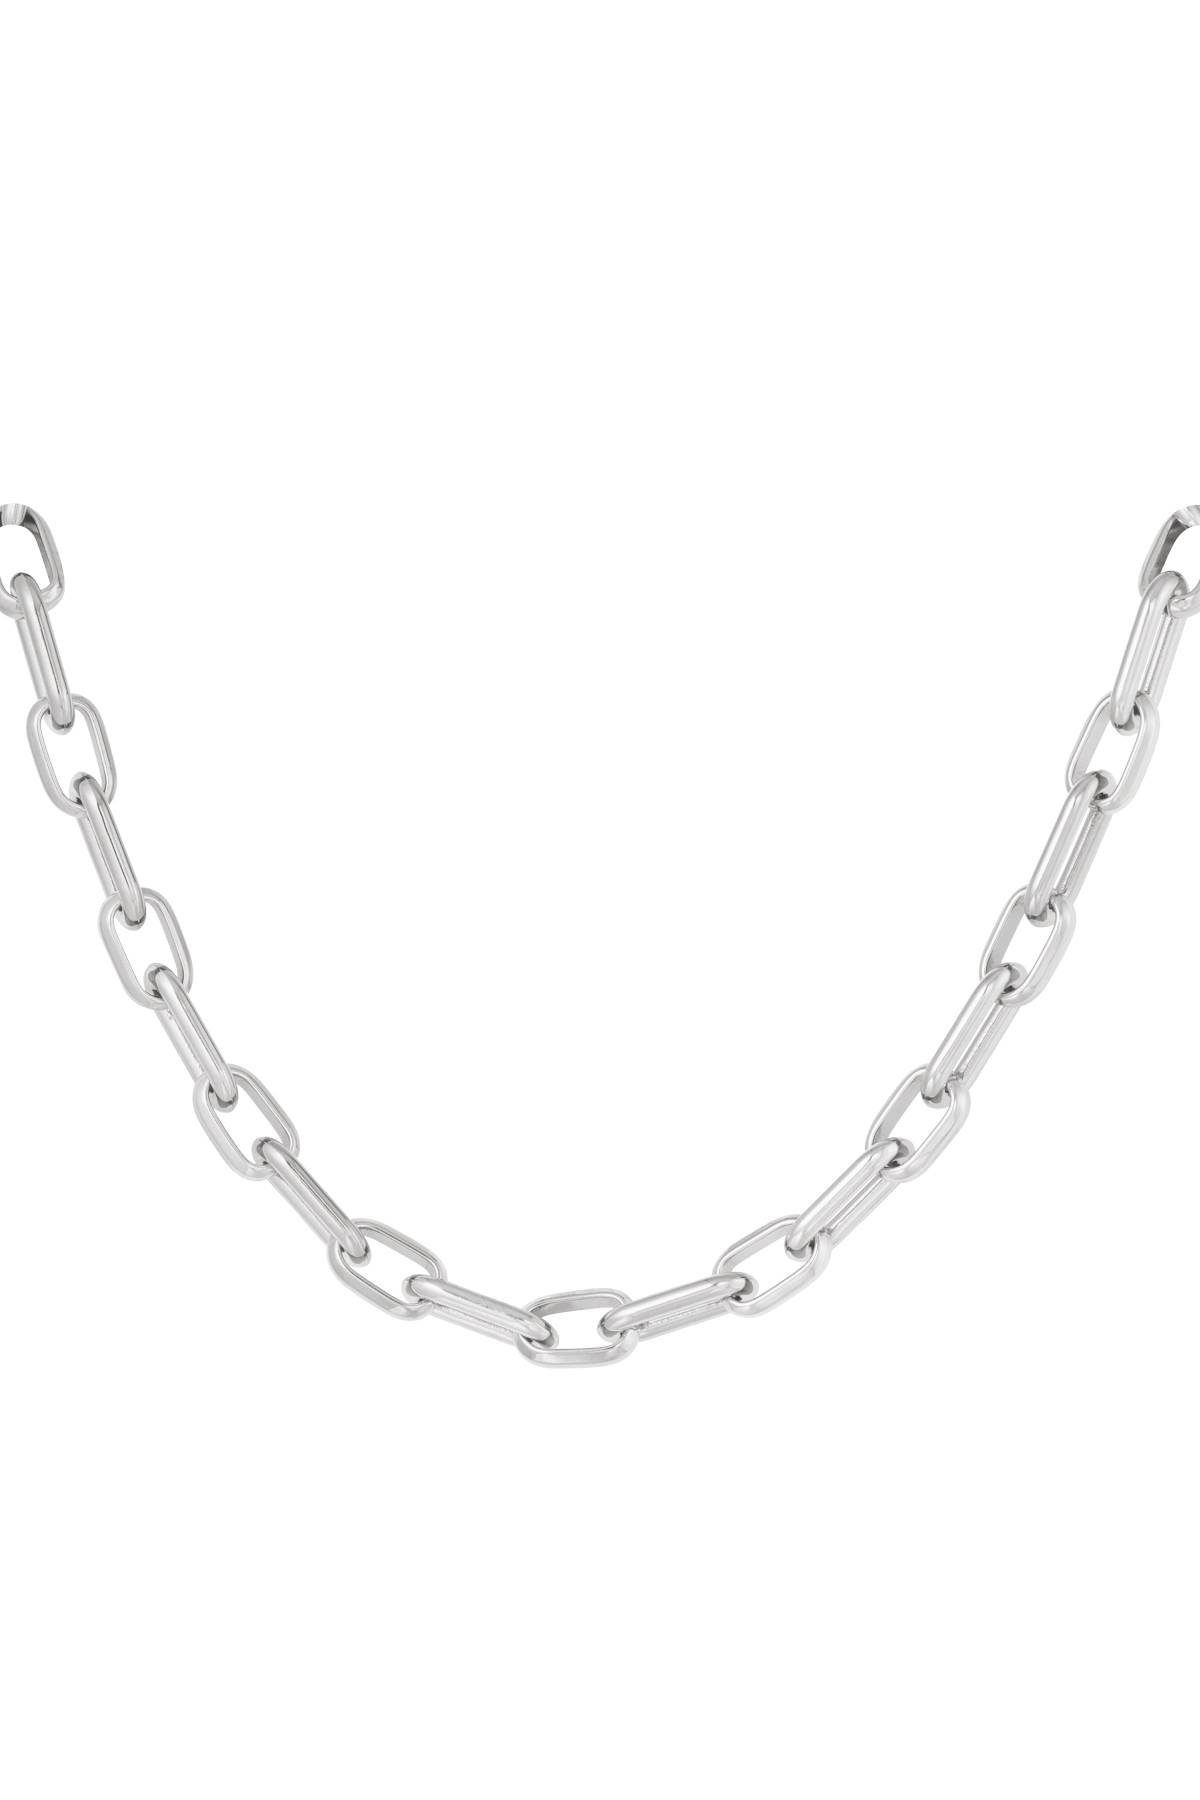 Necklace elongated links with charms - silver h5 